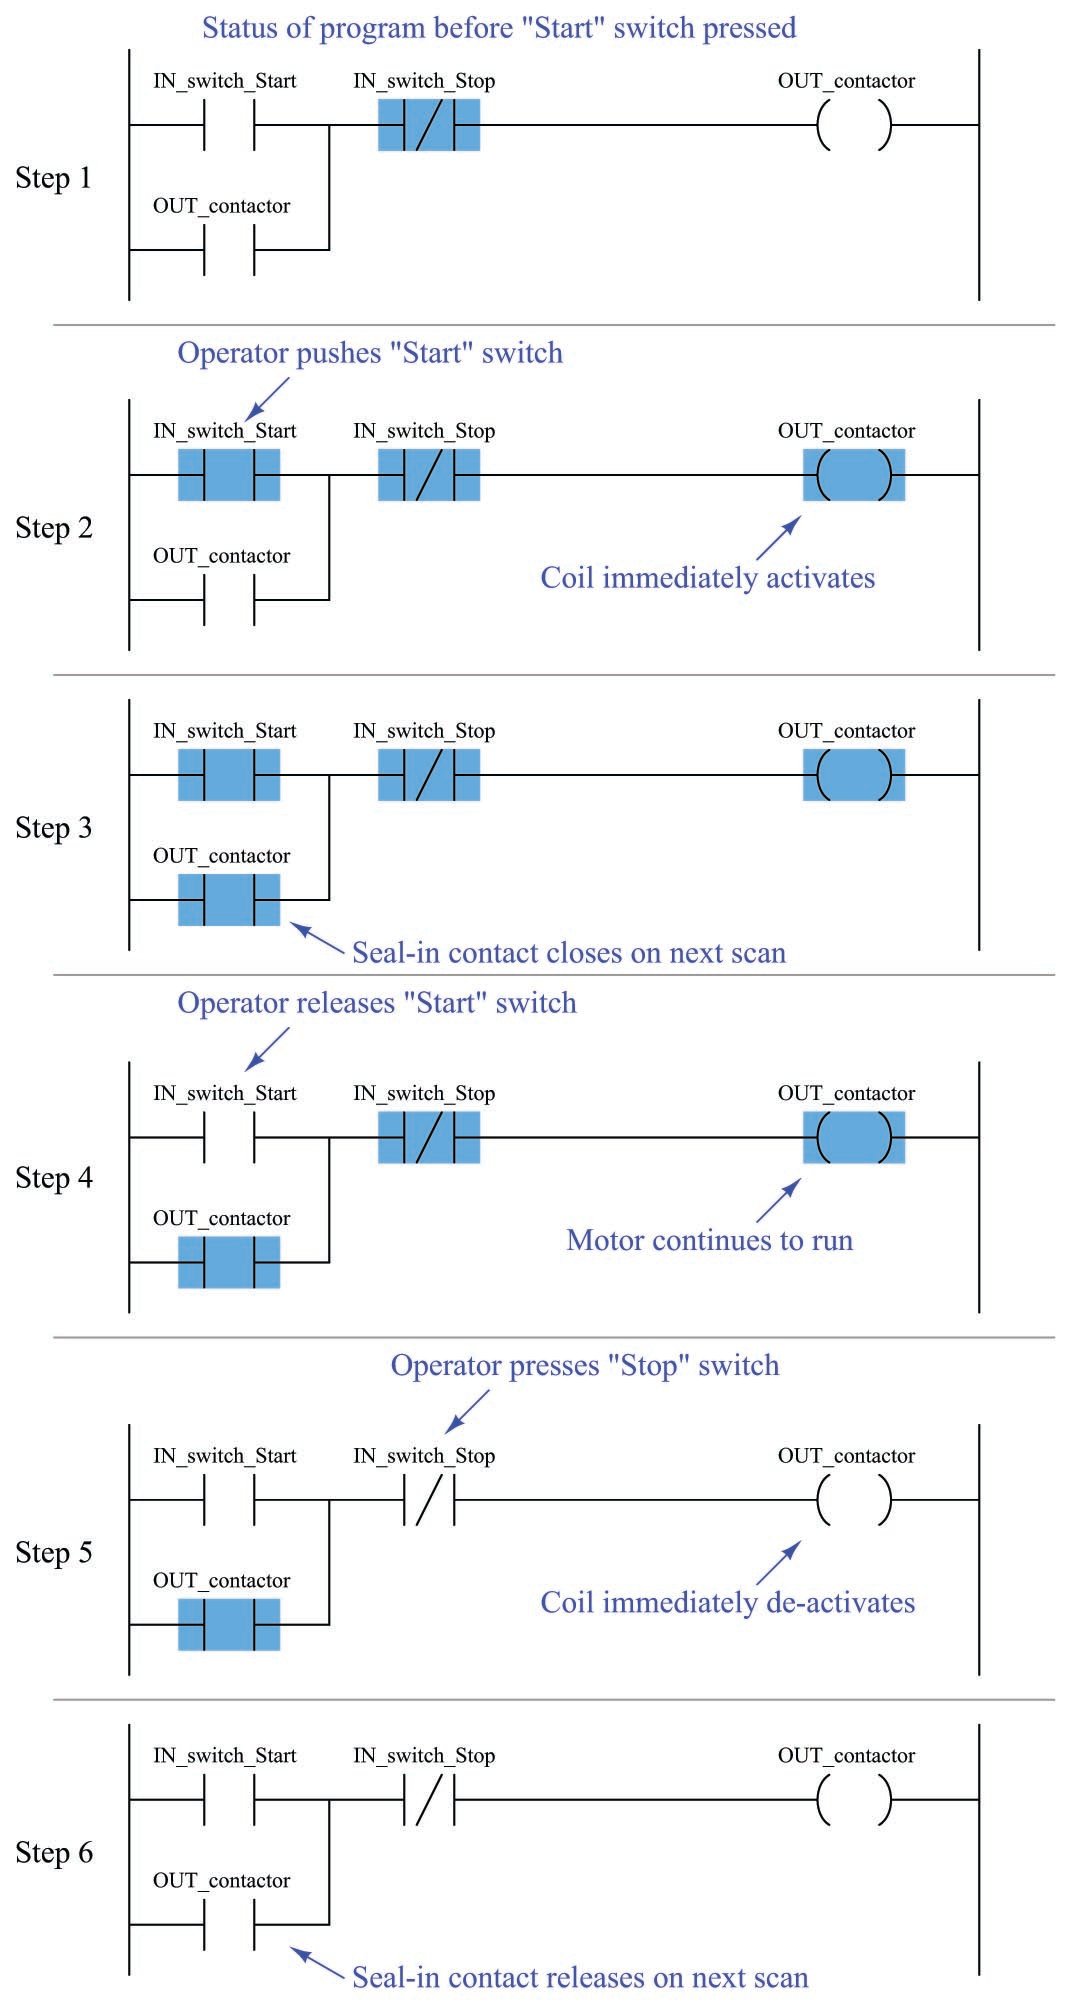 what is the method used by the plc to write a ladder logic program is called